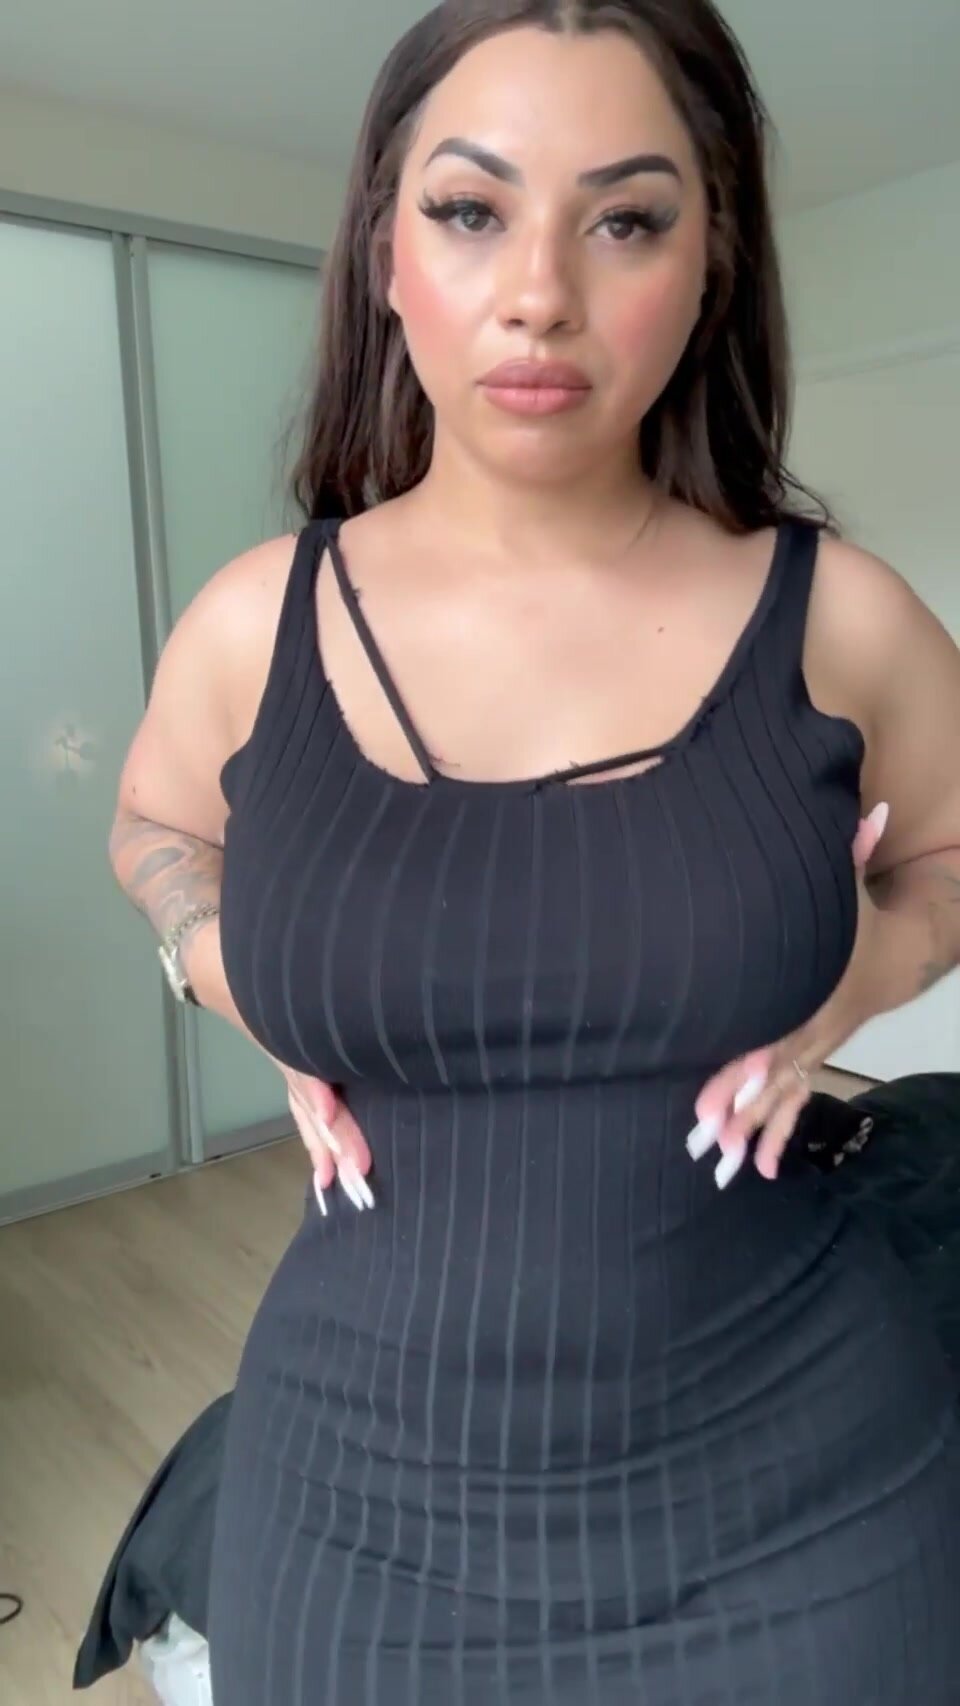 How many times a day would you fuck me, papi?